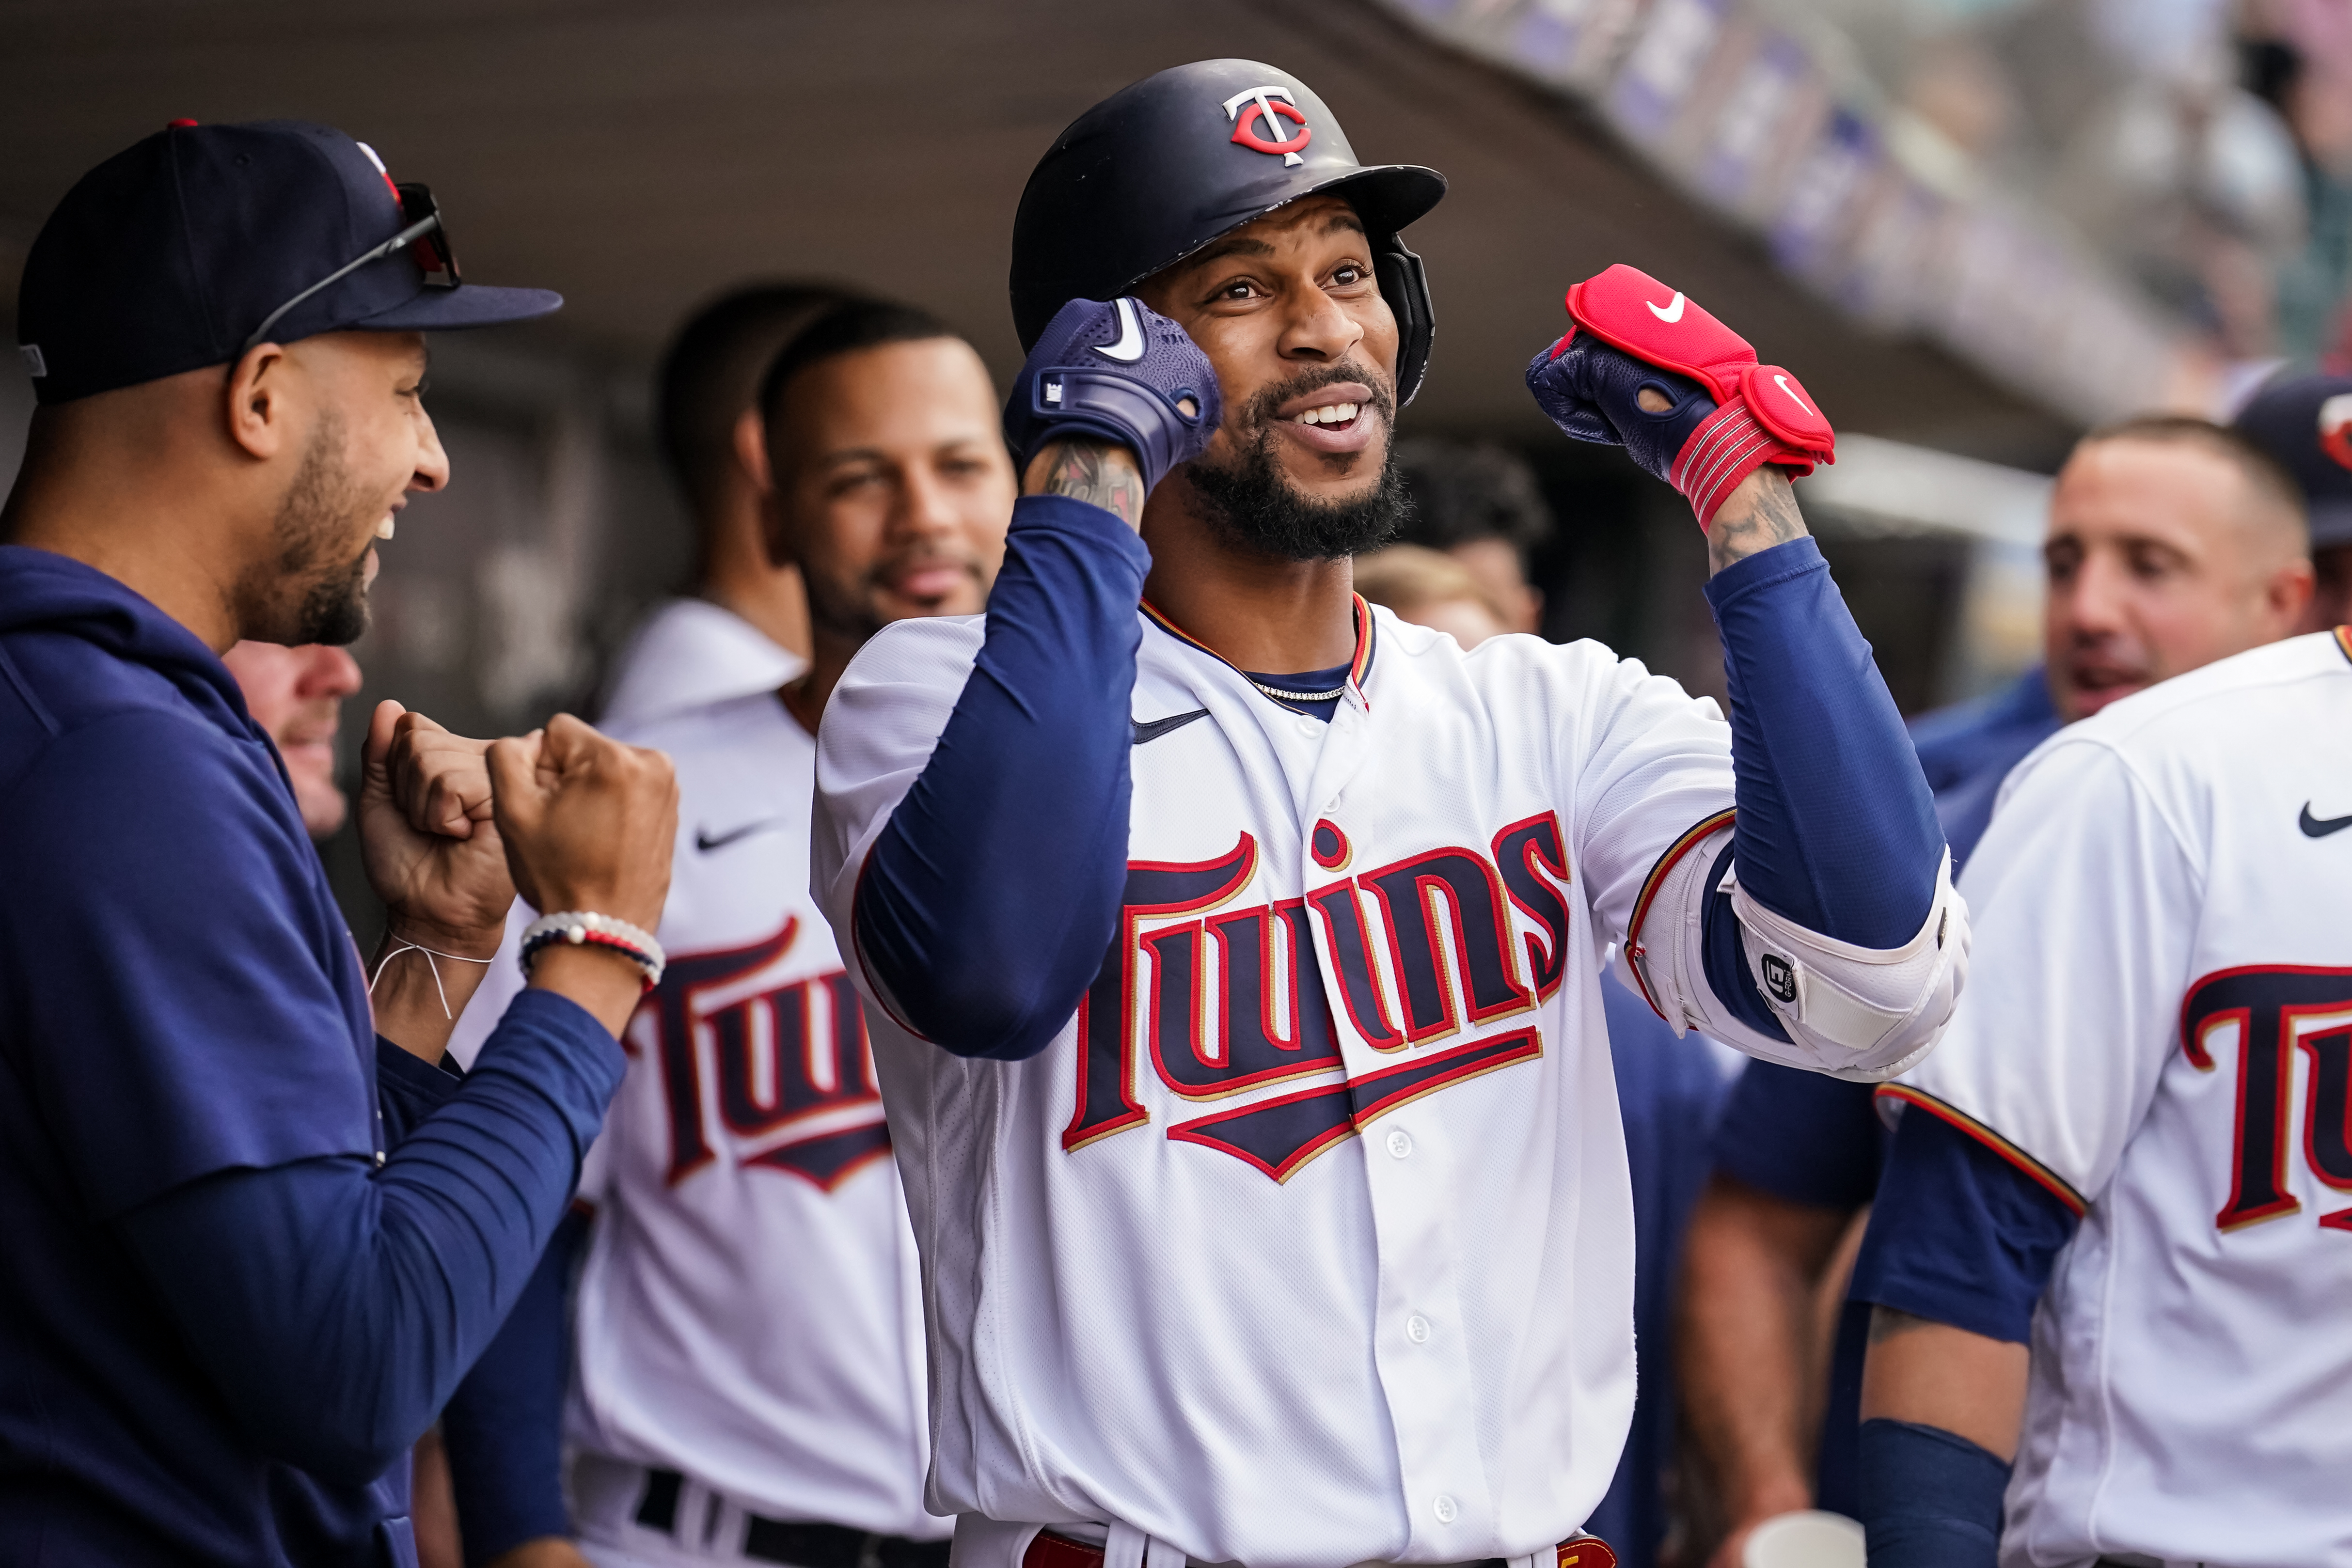 Minnesota Twins turn first ever 8-5 triple play in MLB history